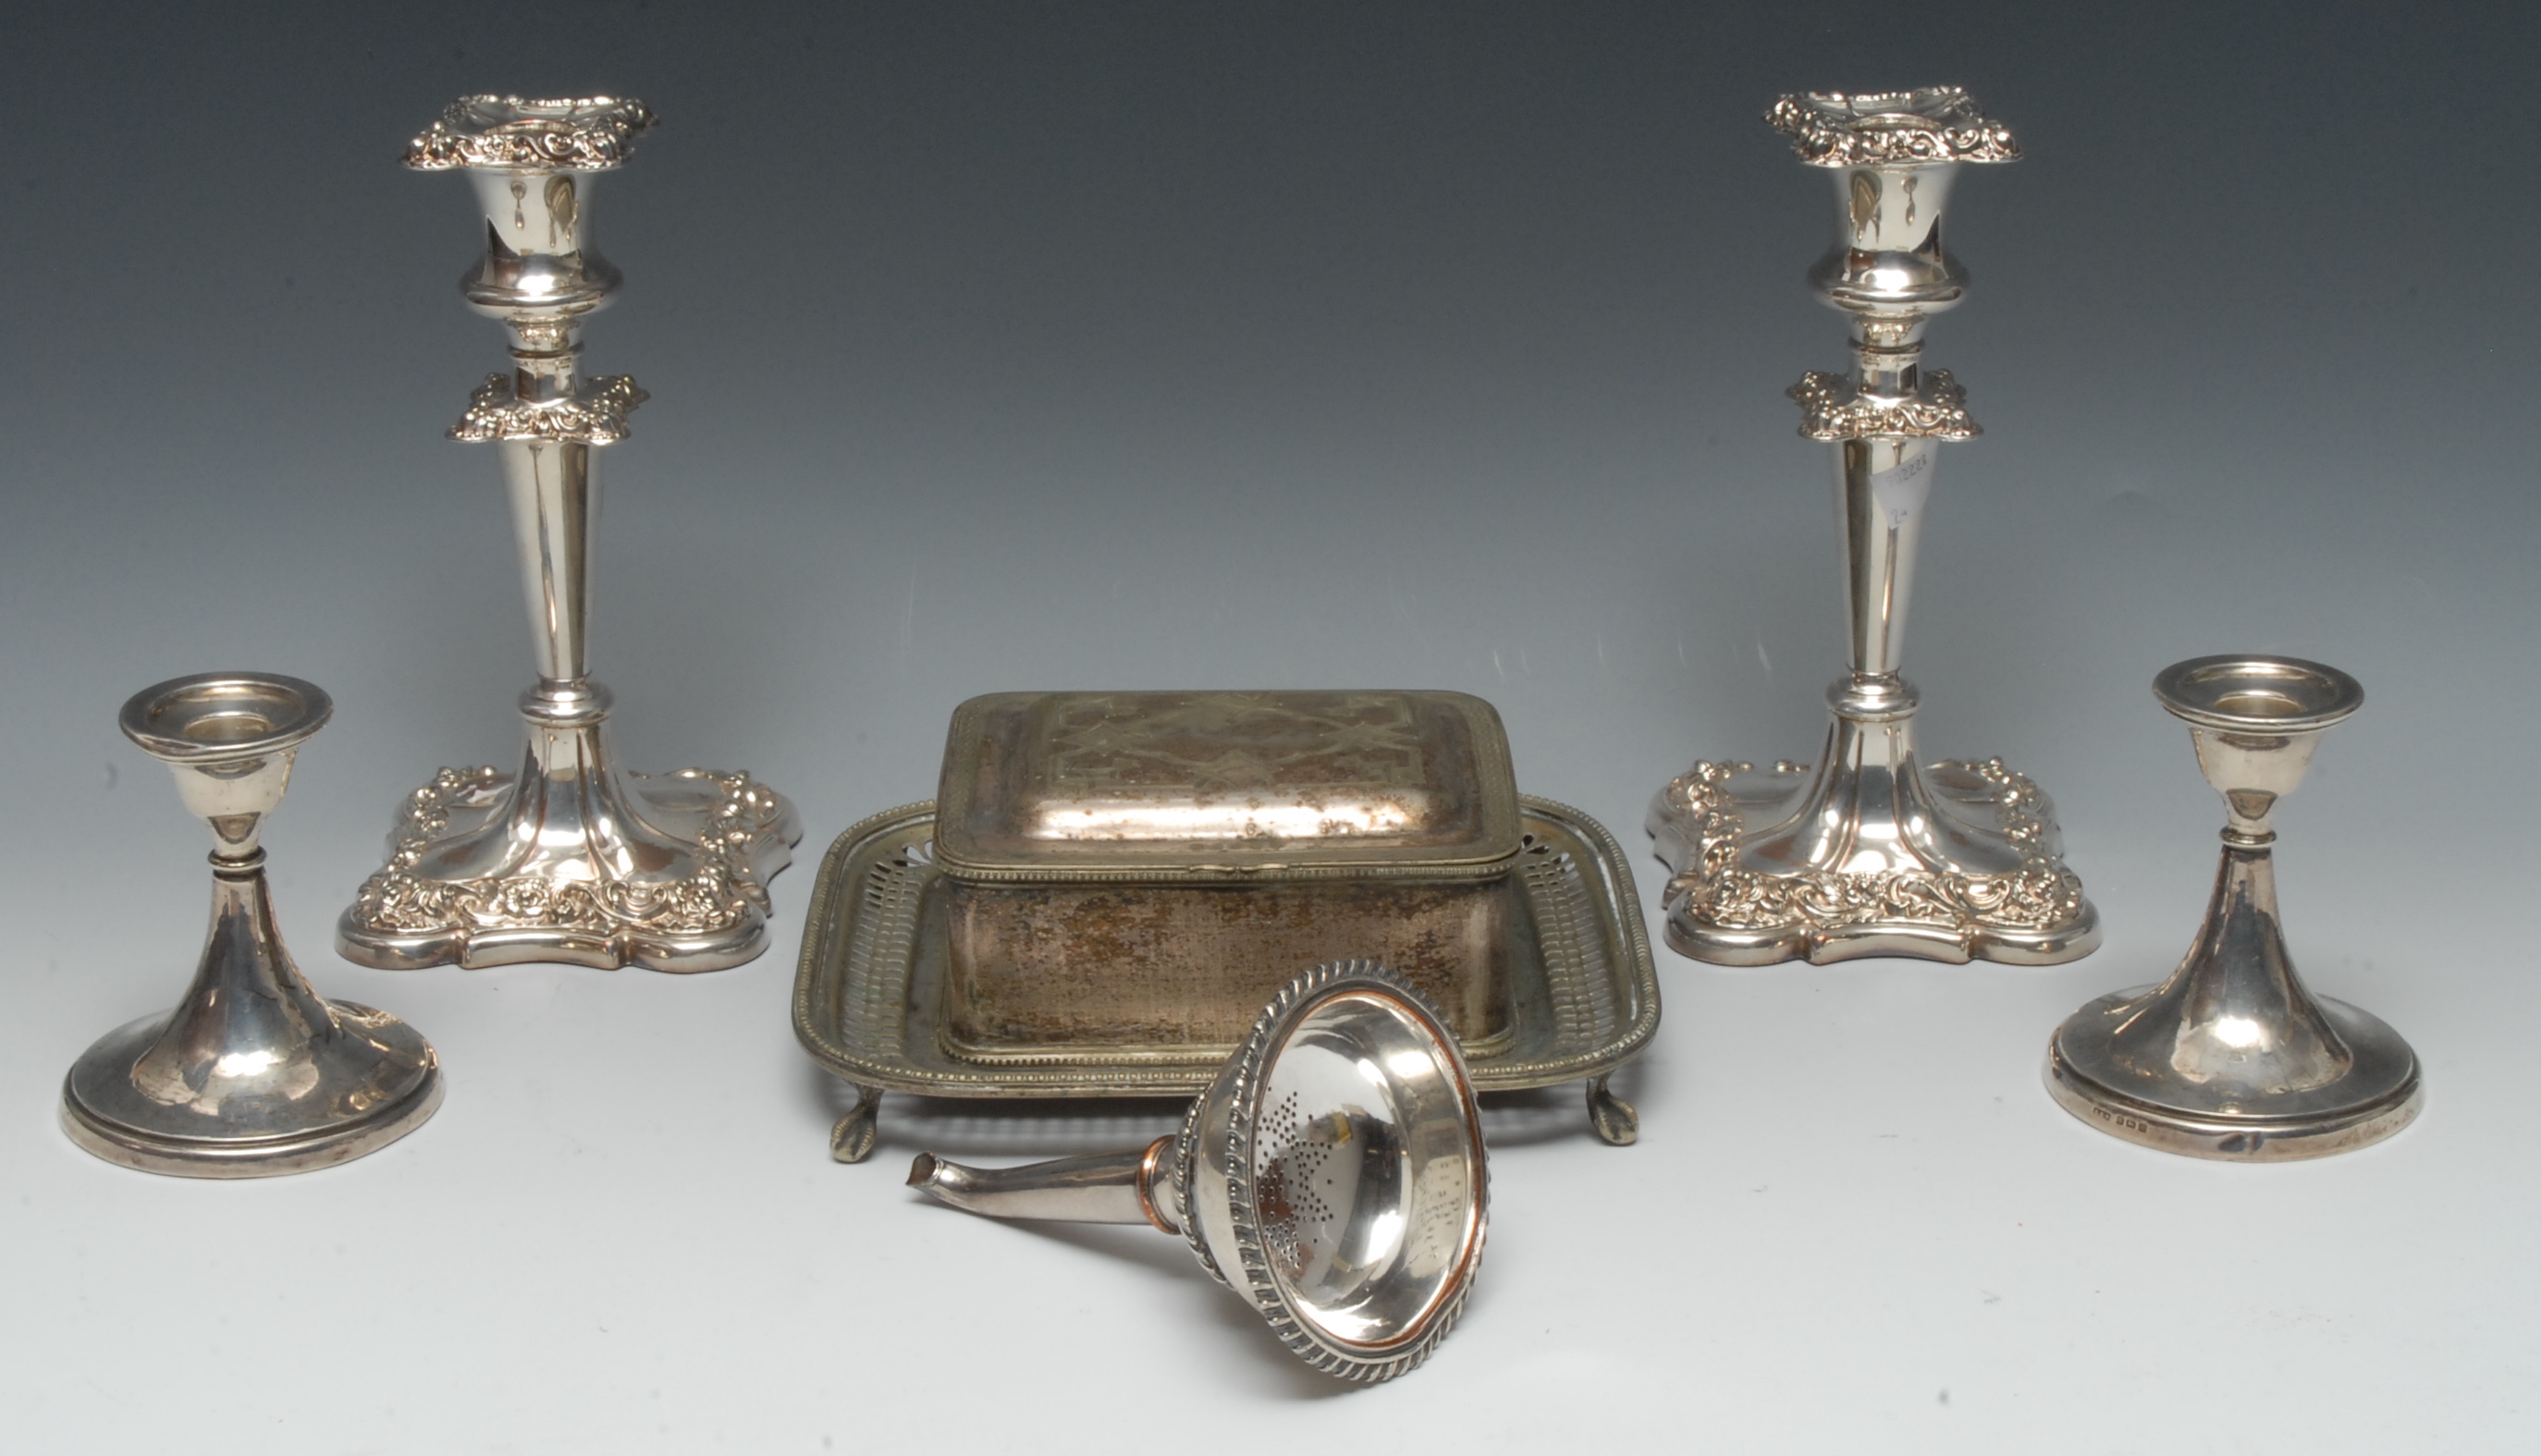 A George III Old Sheffield Plate wine funnel, gadrooned borders, 13cm long, c.1800; a pair of E.P.